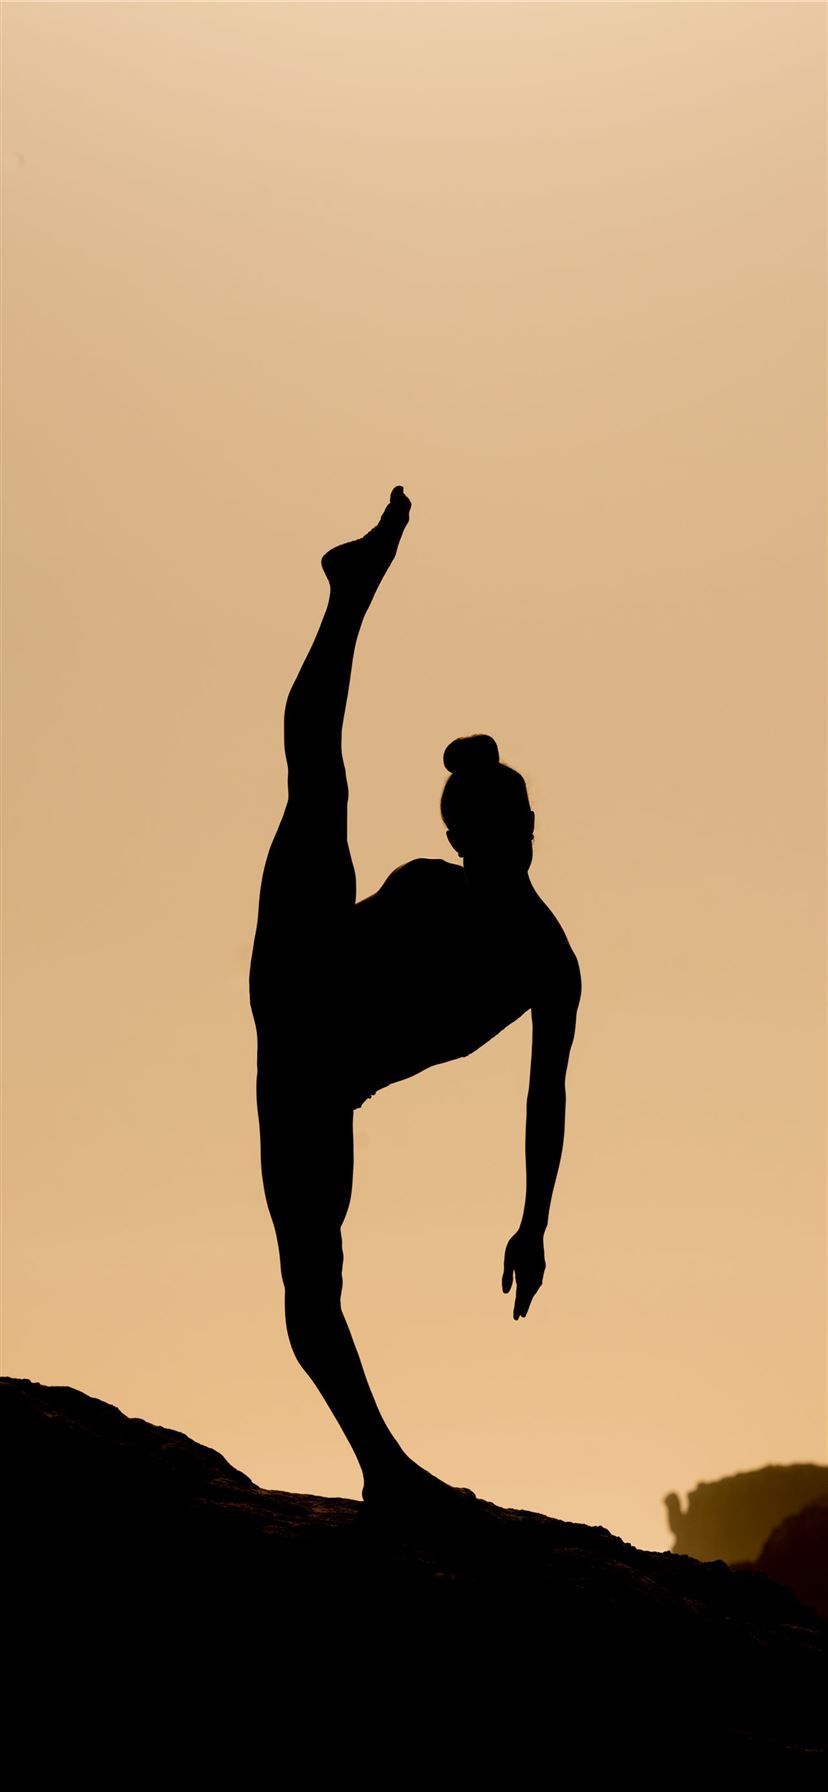 A silhouette of a man doing a one-handed handstand against a sunset sky - Dance